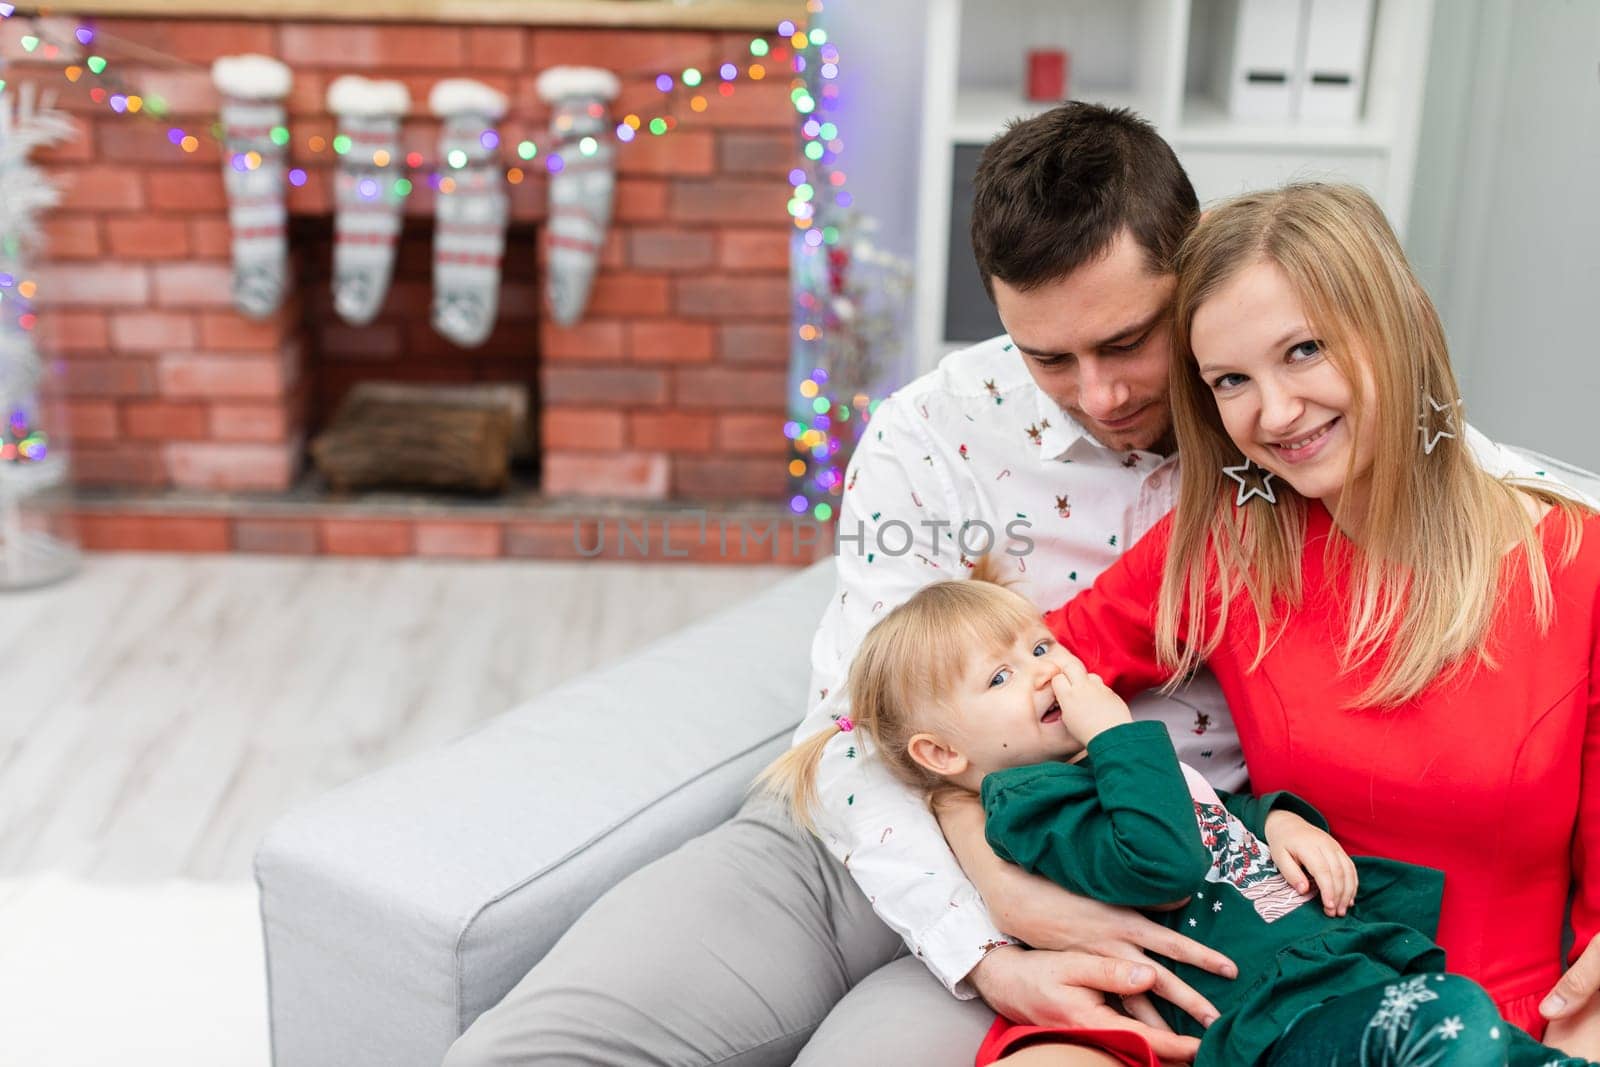 A man, a woman and a little girl sit together on a gray couch. The woman holds her lying daughter in her lap. The blurry background shows a brick fireplace decorated with Christmas lights.